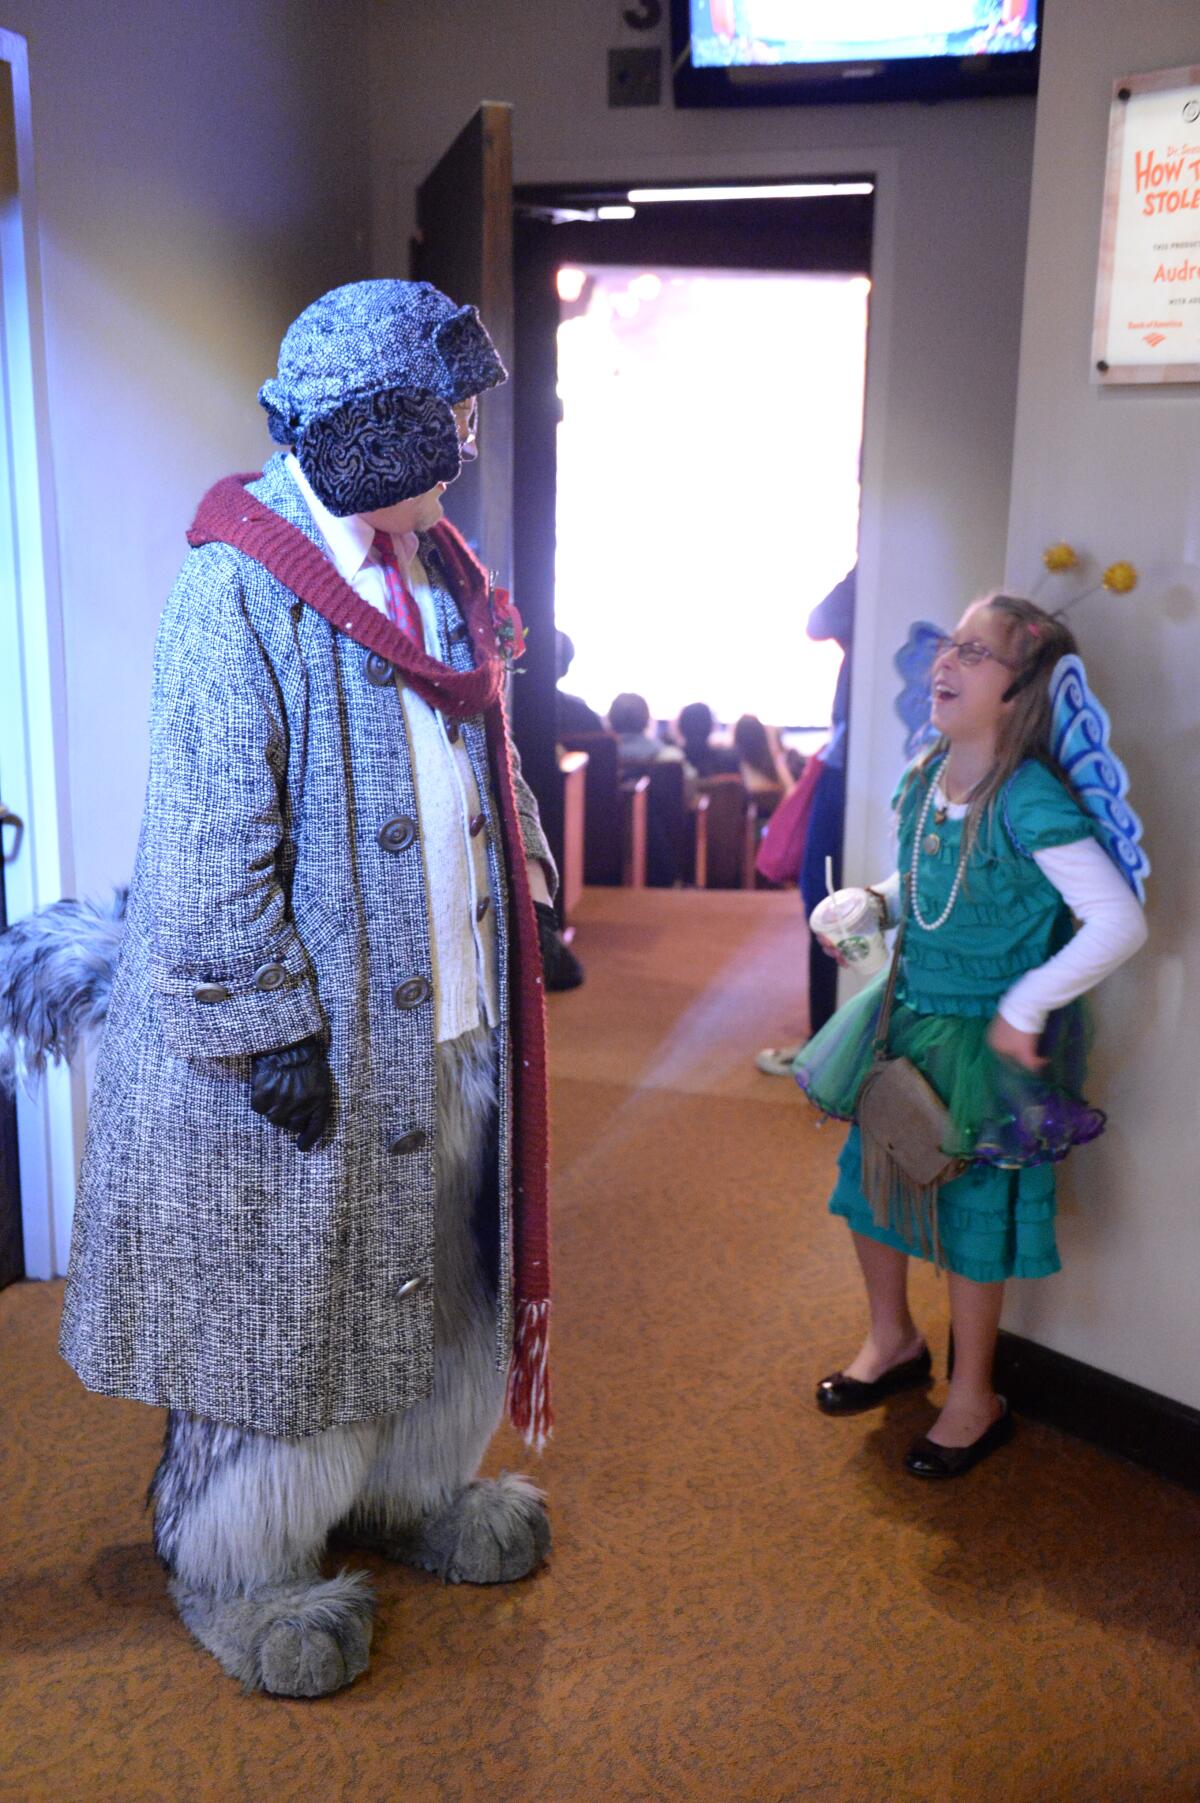 Actor Steve Gunderson and child at sensory-friendly performance of "Dr. Seuss's How the Grinch Stole Christmas!" 